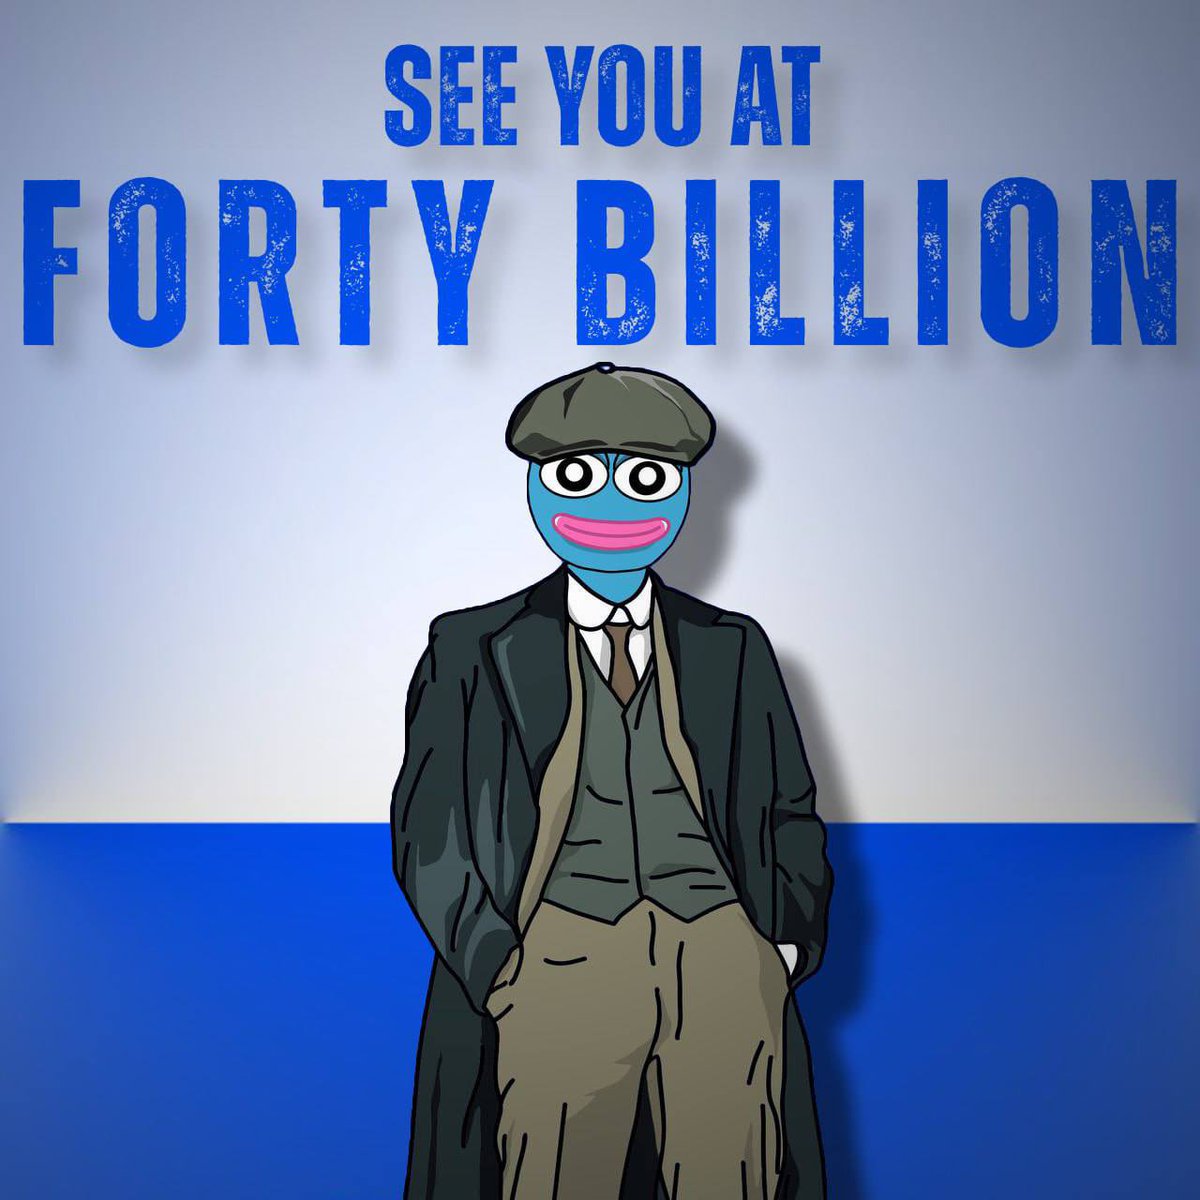 We are looking so astonishingly bullish 🚀🚀

$7.00 $BRETT WILL happen 

Someone needs to edit this graphic to say “see you at seventy billion” because $40 billion is just our floor tbh